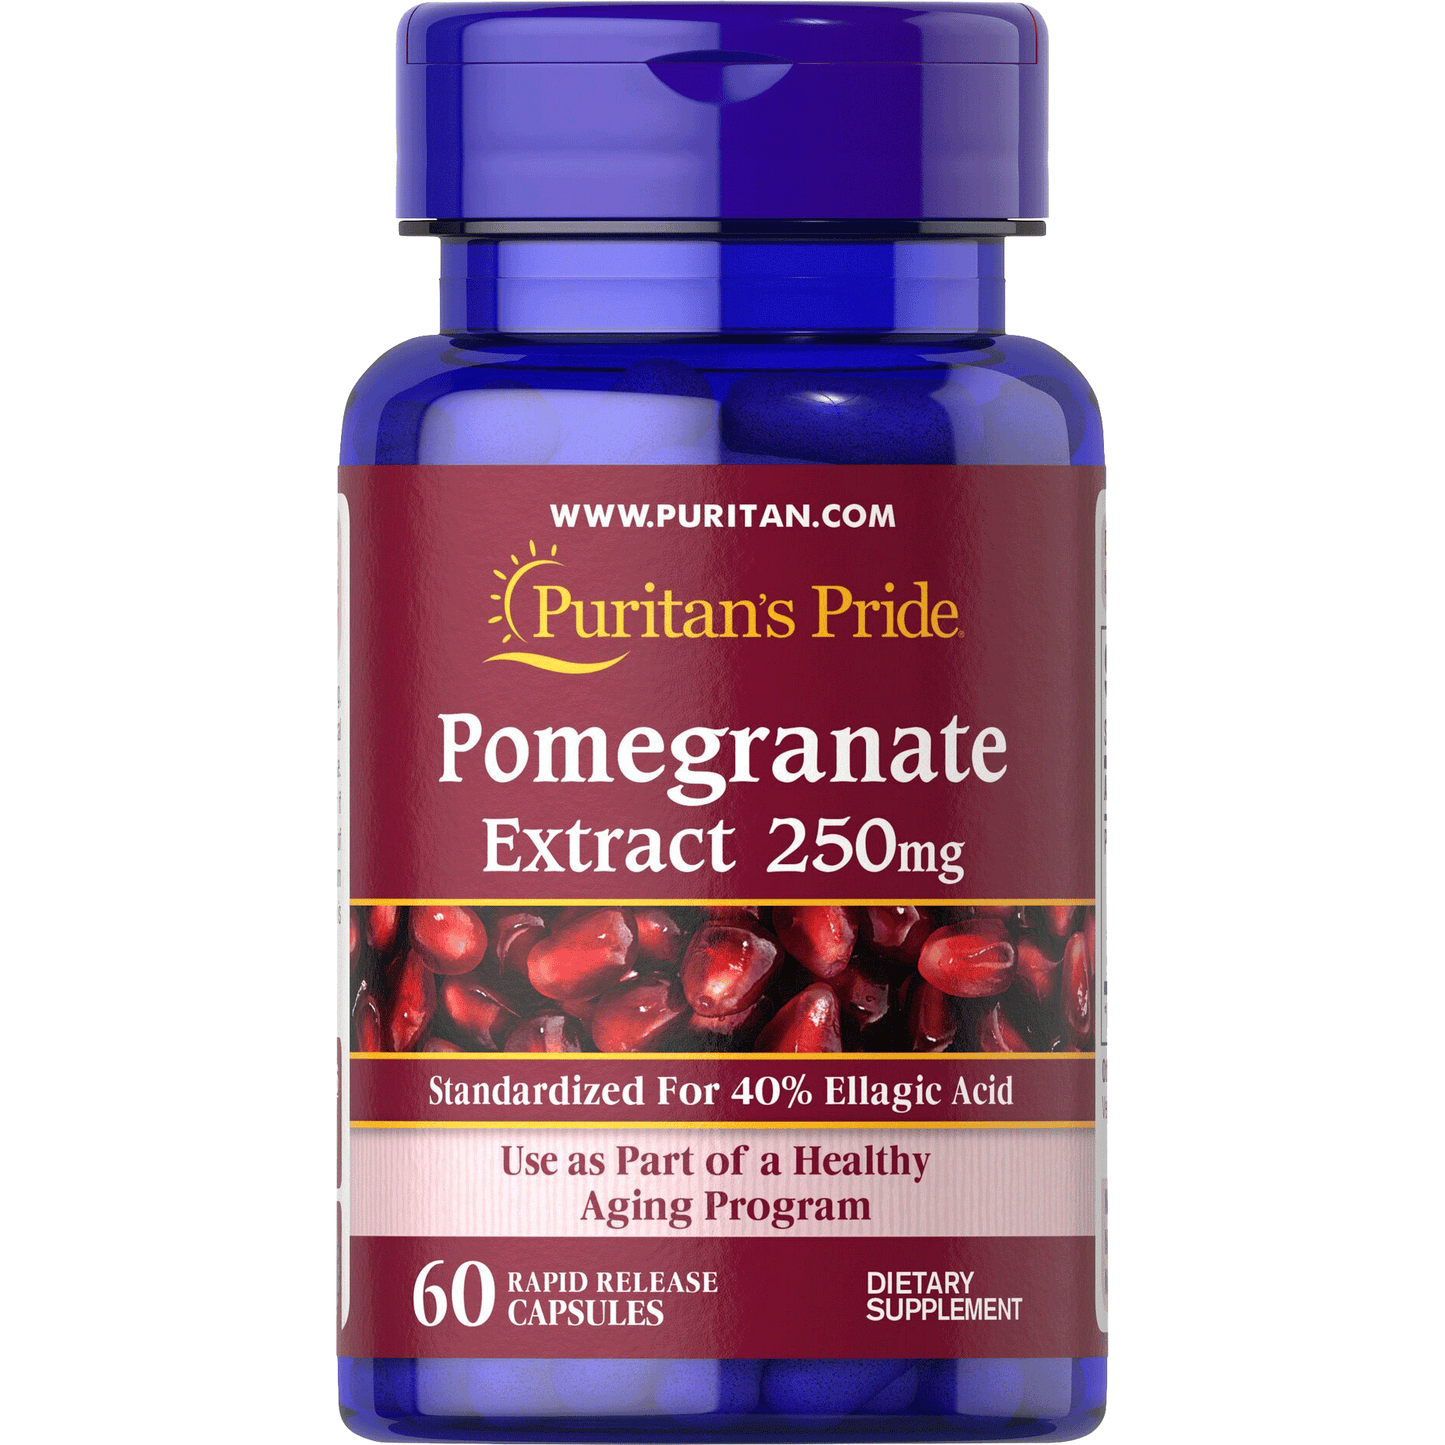 Pomegranate Extract 250 mg 60 capsules